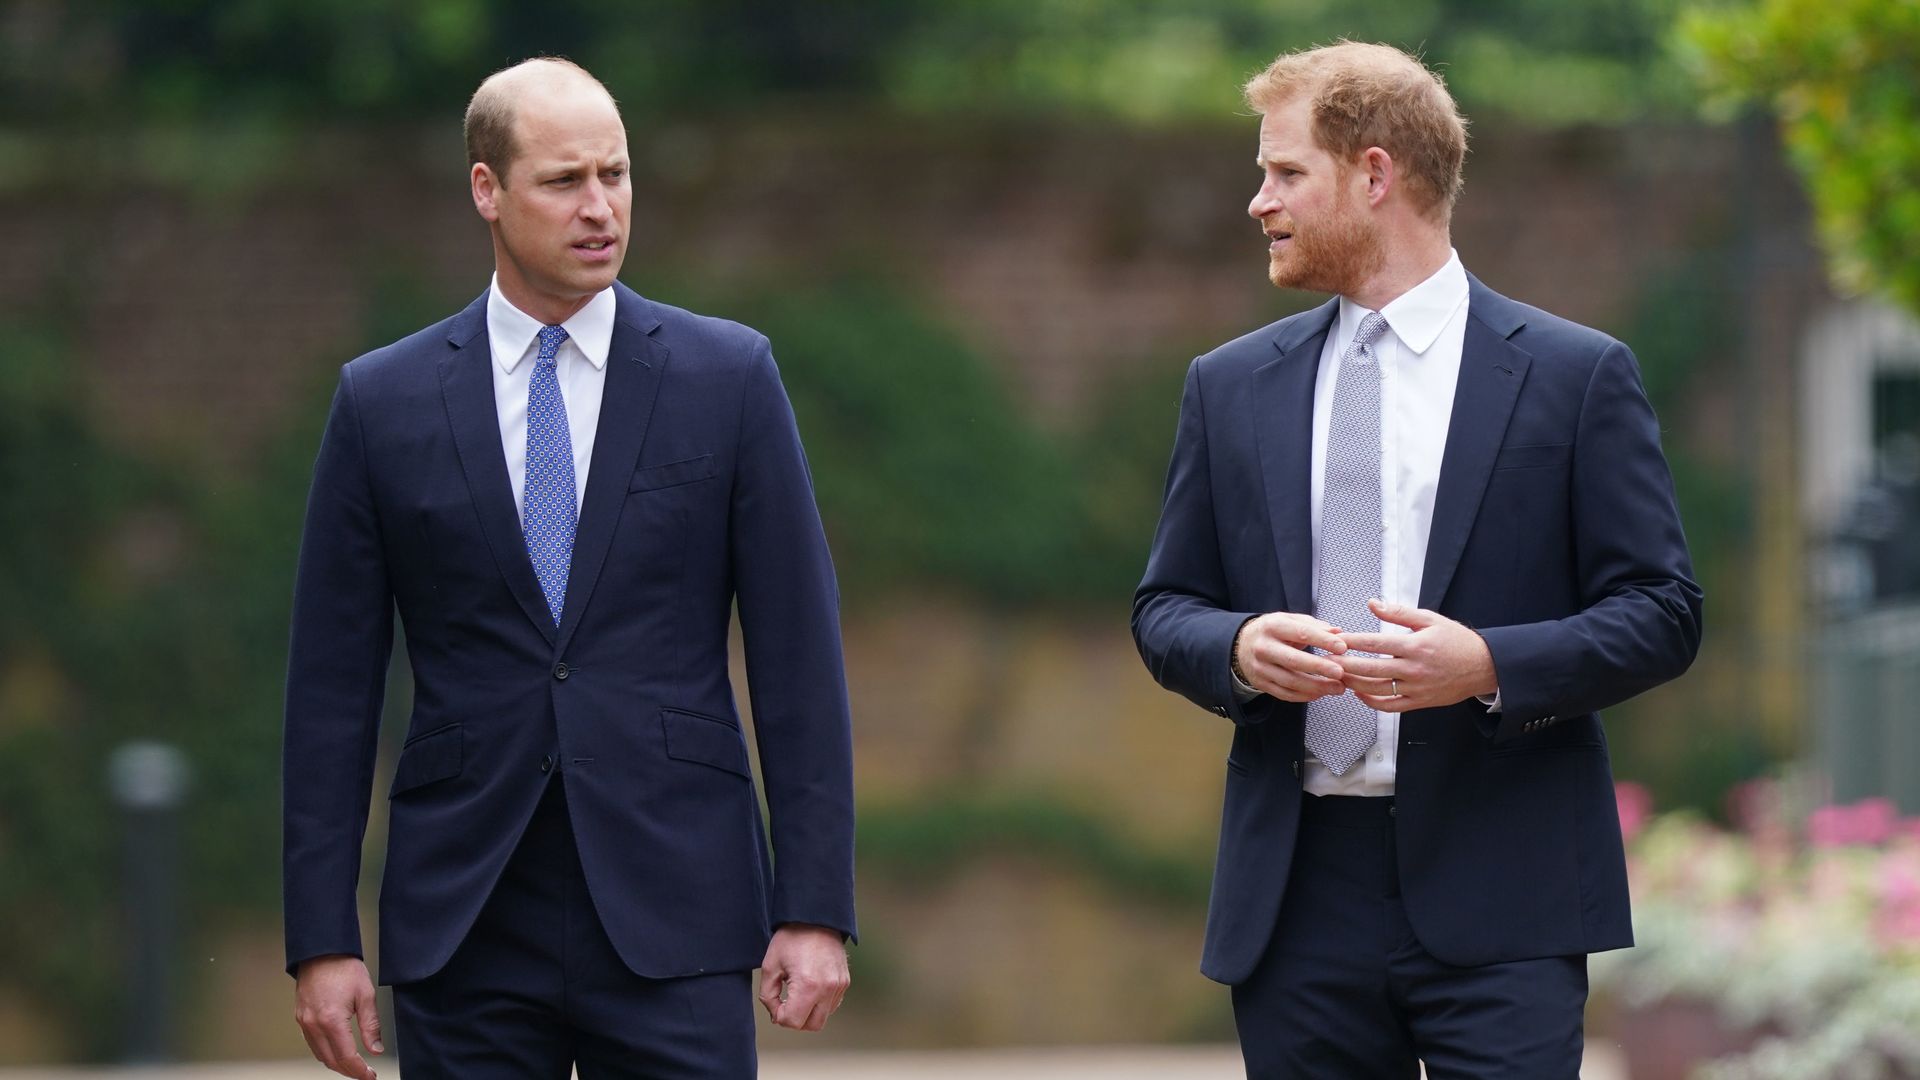 Prince William and Prince Harry arrive for the unveiling of a statue they commissioned of their mother Diana, Princess of Wales